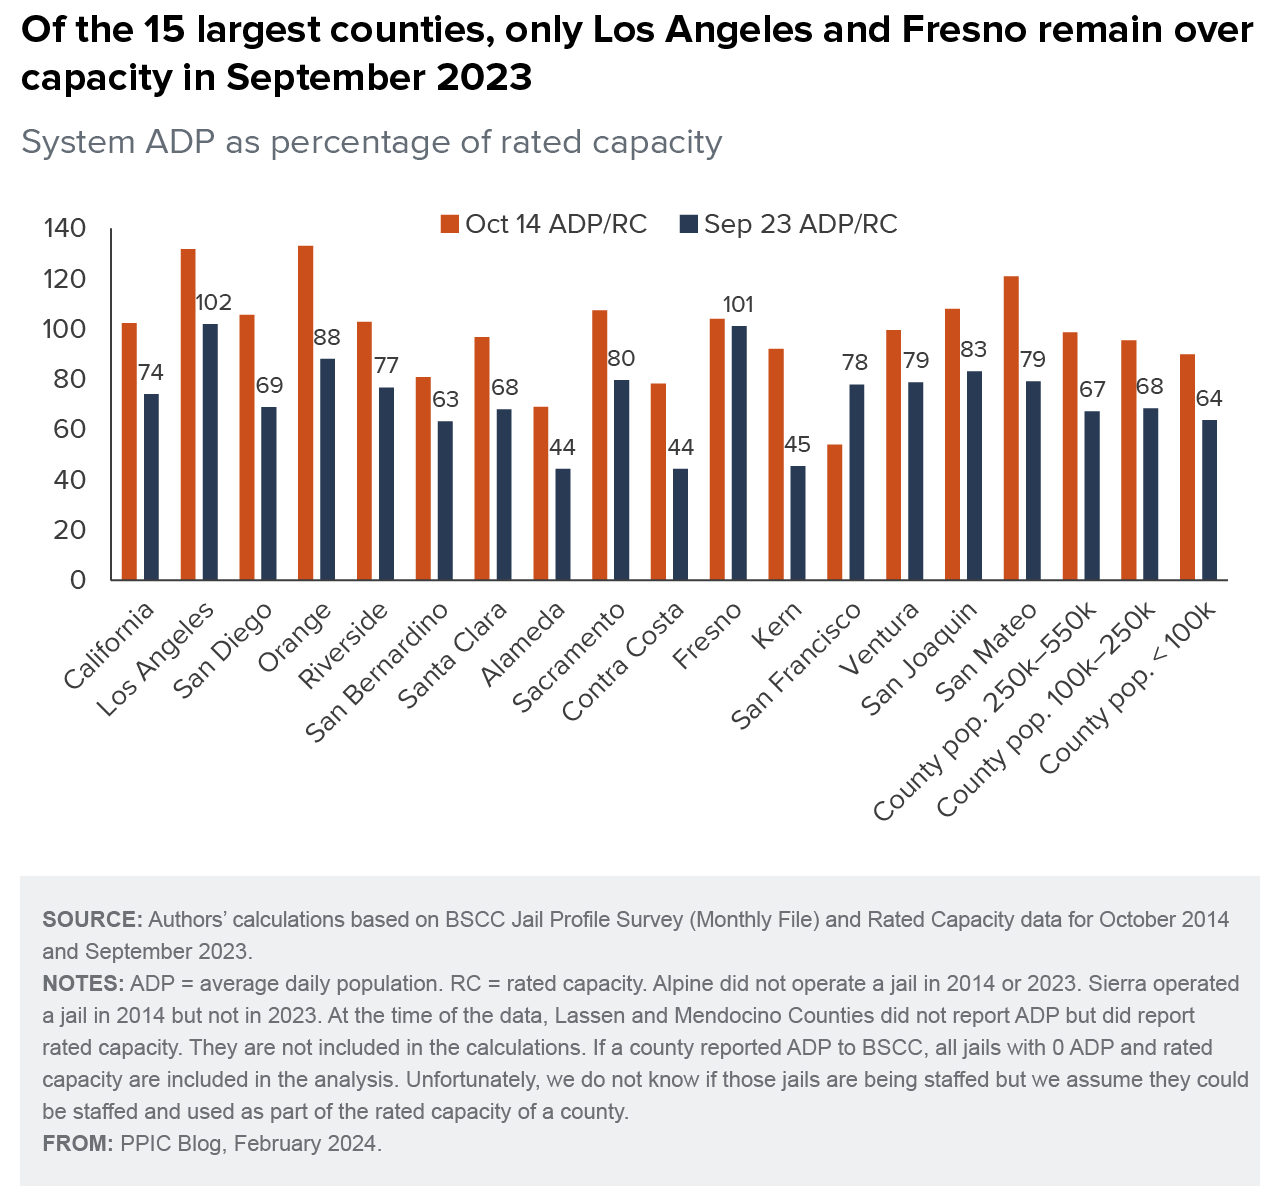 figure - Of the 15 largest counties, only Los Angeles and Fresno remain over capacity in September 2023